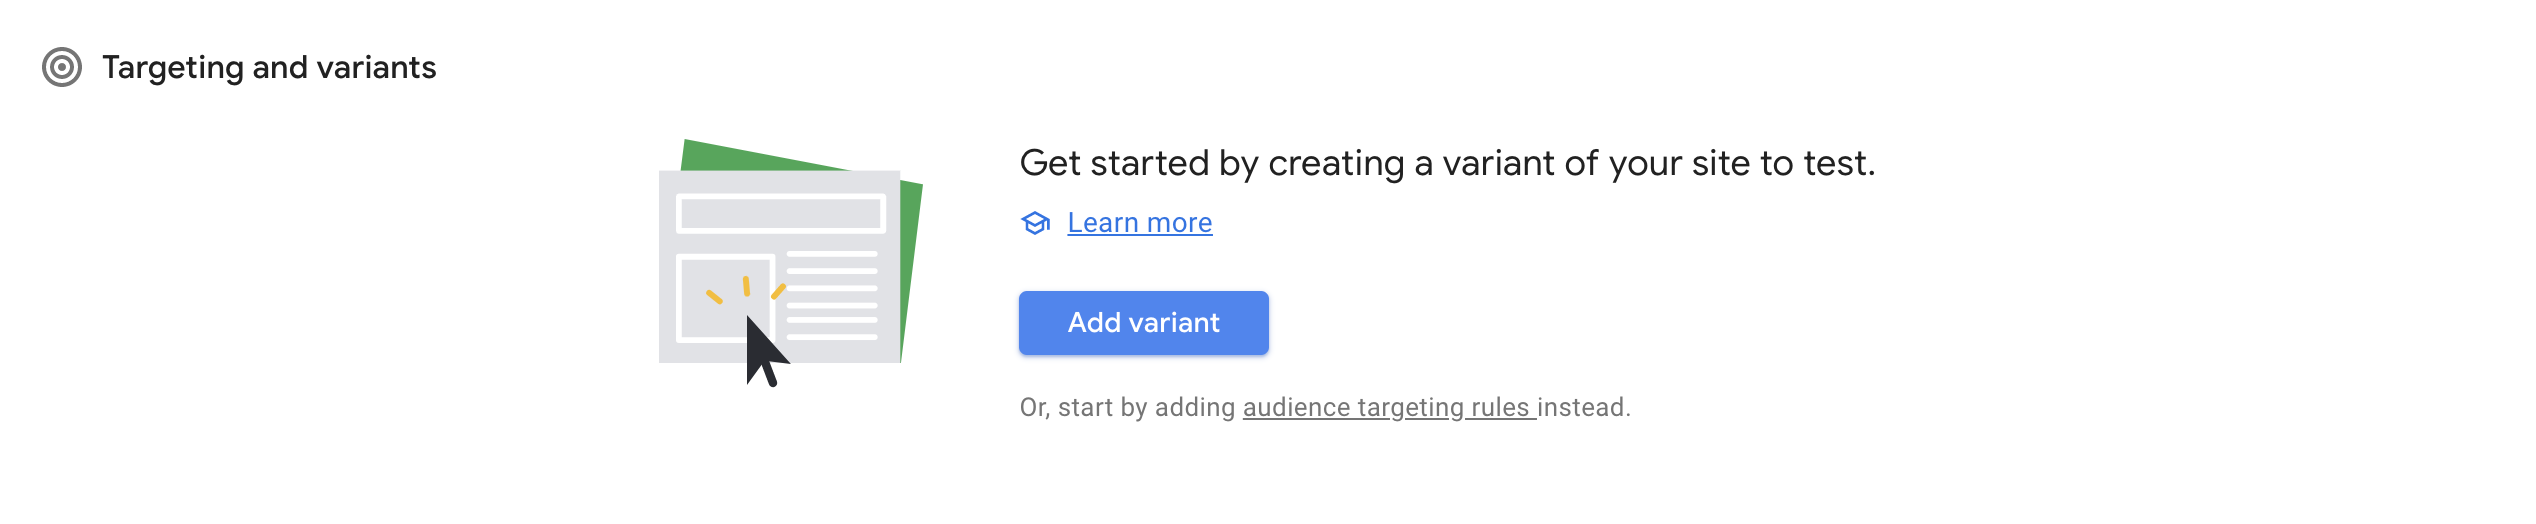 Adding variants in an A/B test in Google Optimize